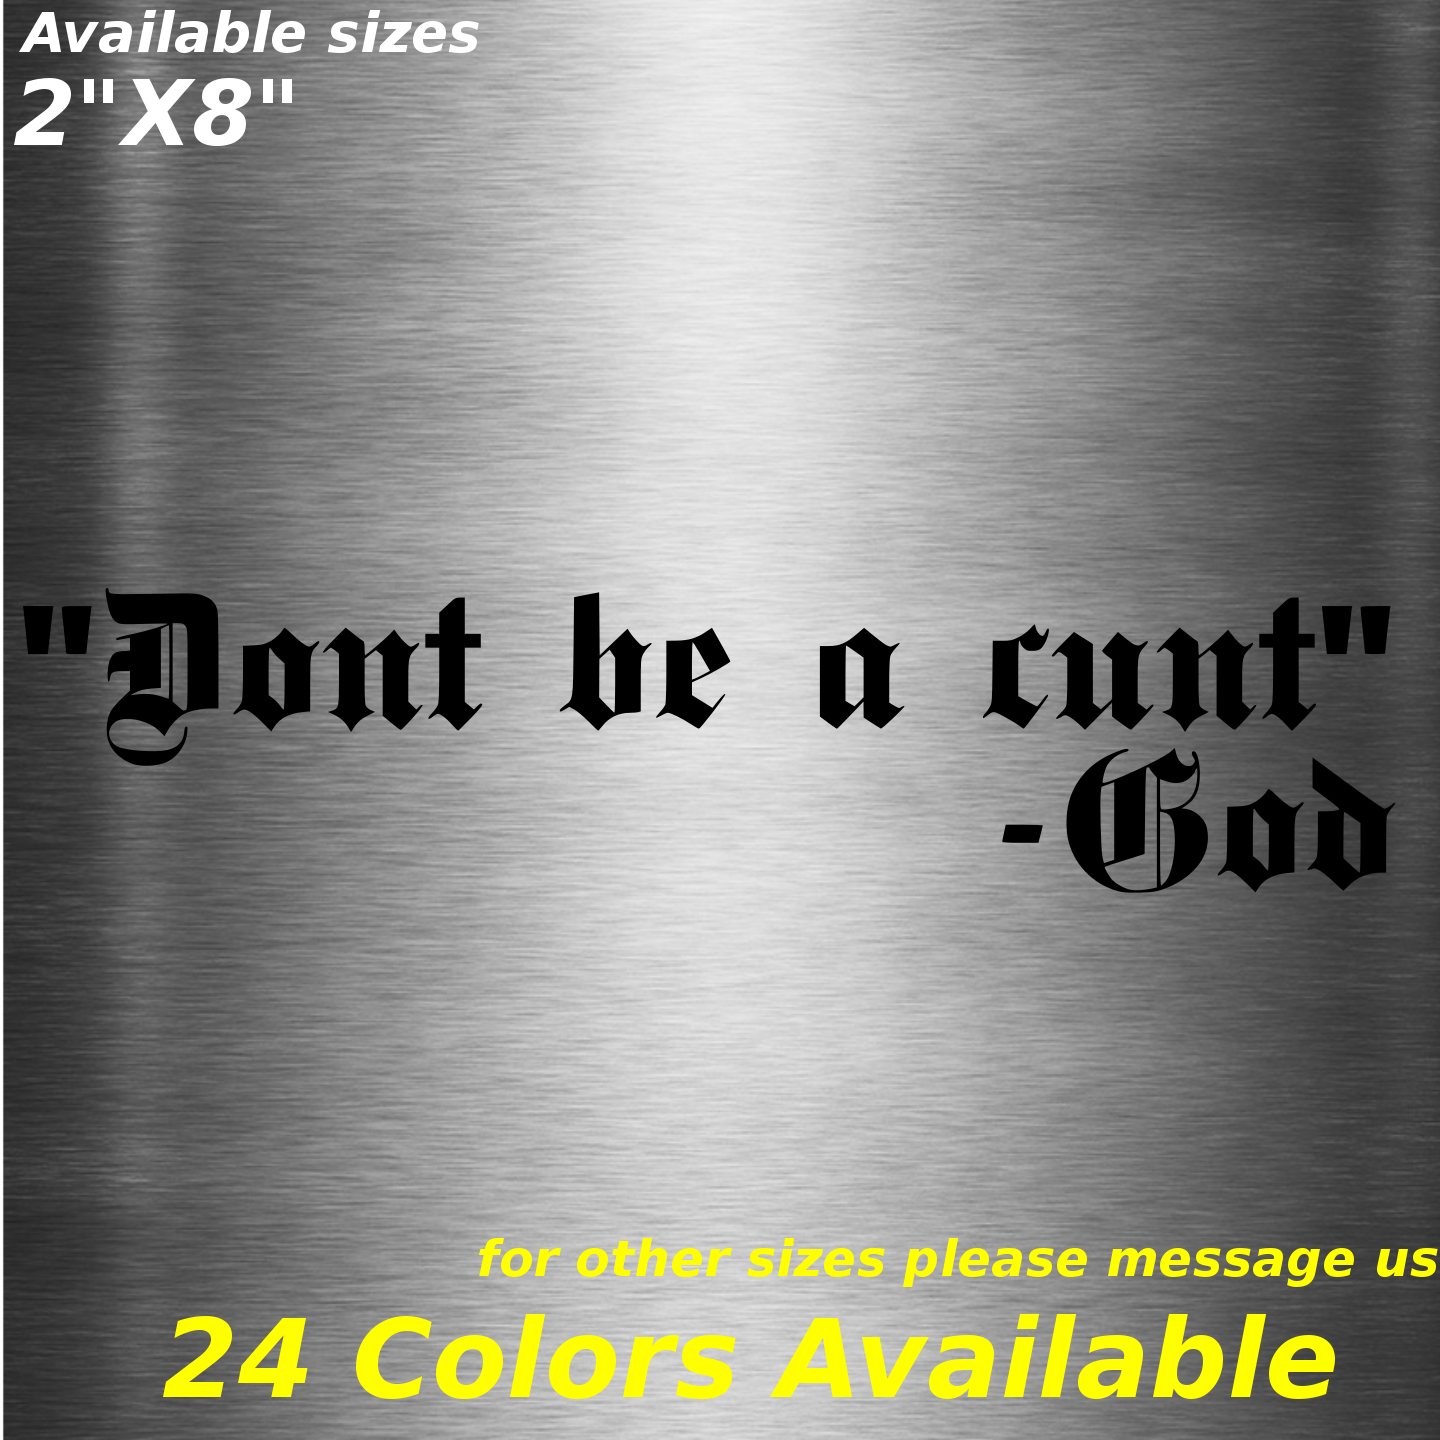 Dont be a Cnt decal sticker religion quote funny humor joke